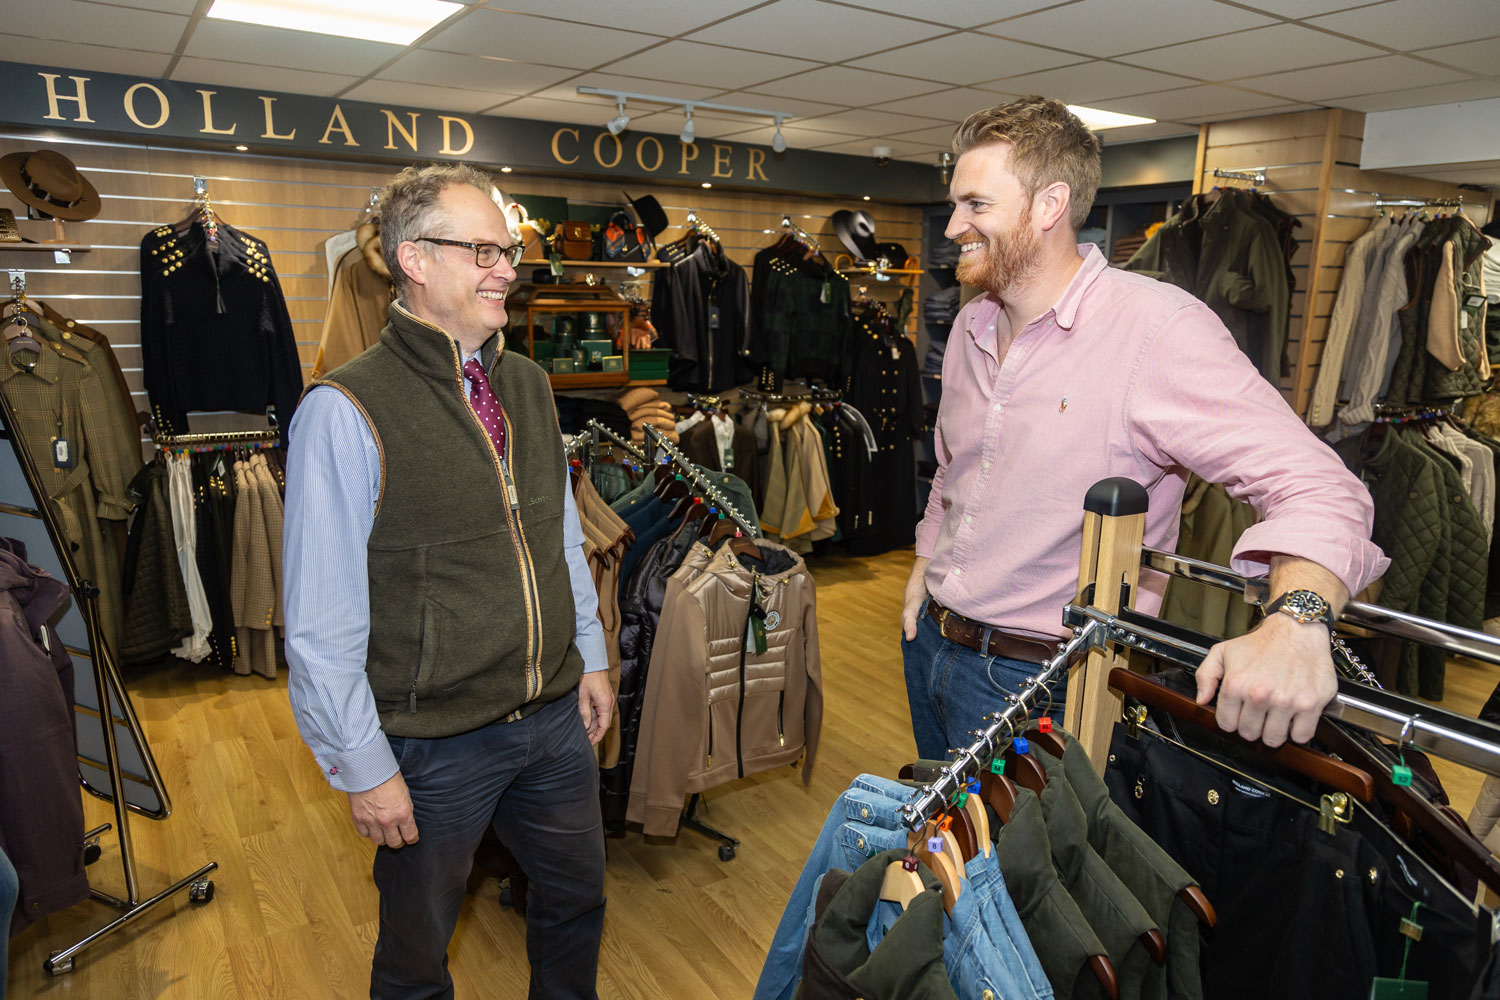 Thrings meets Alex Barton, Director of Wadswick Country Store